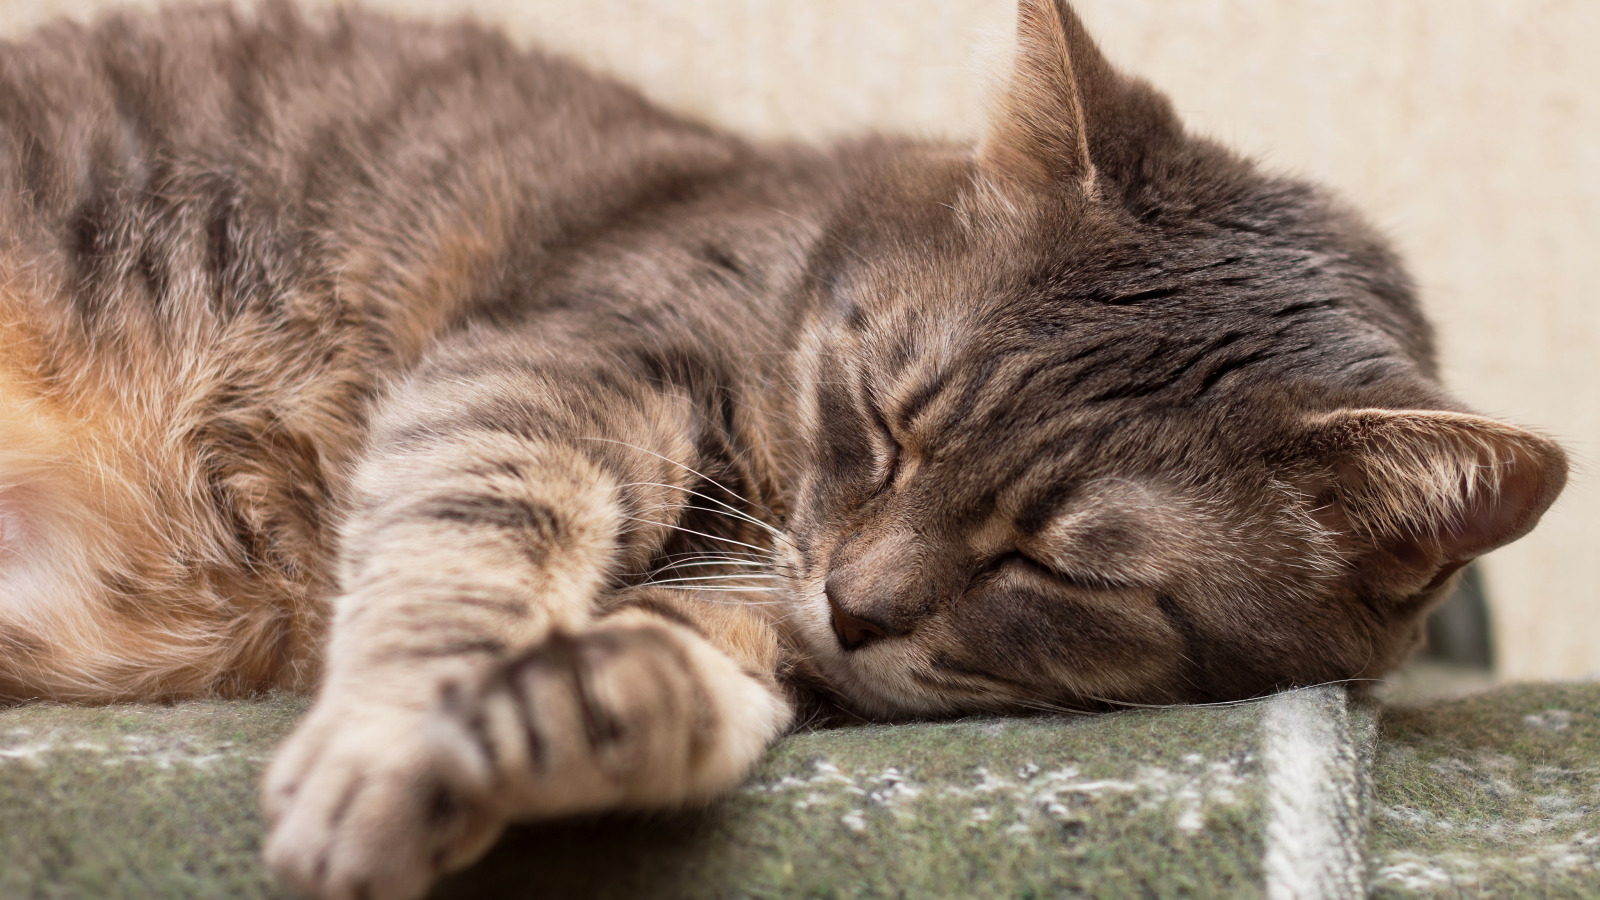 Ranking of the best sleeping pills and sedatives for cats for 2022